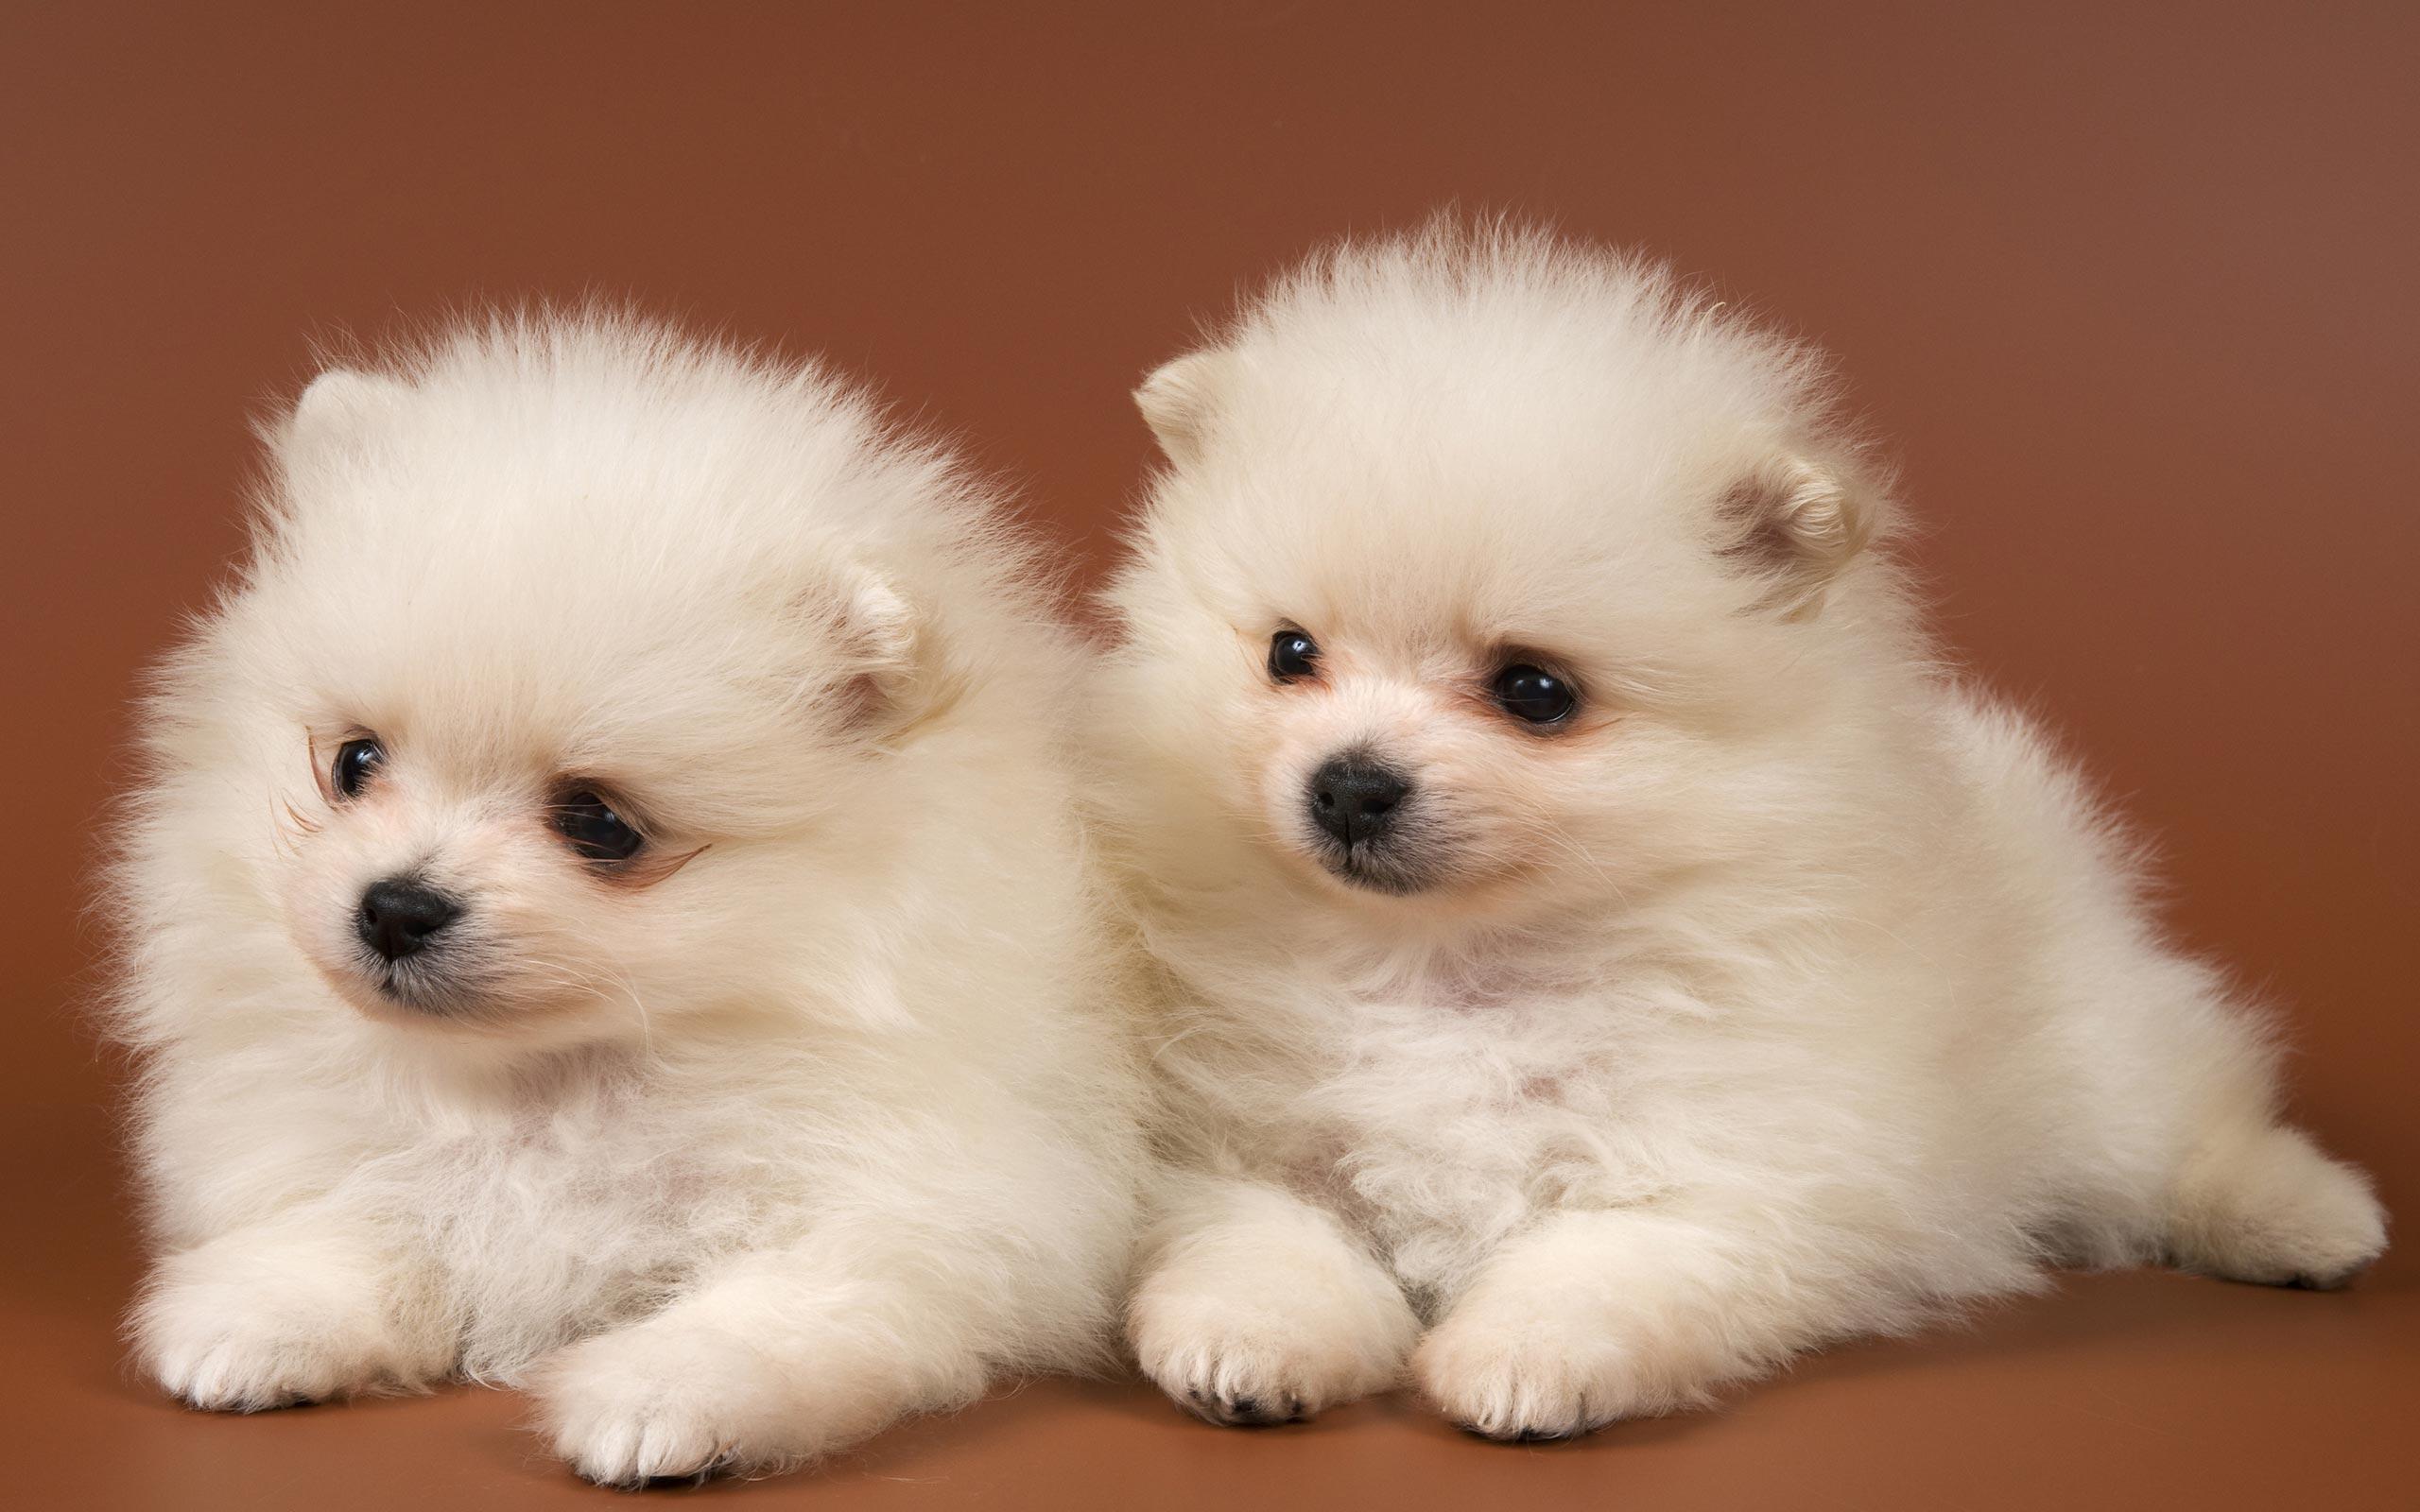 Puppy wallpapers hd desktop backgrounds images and pictures